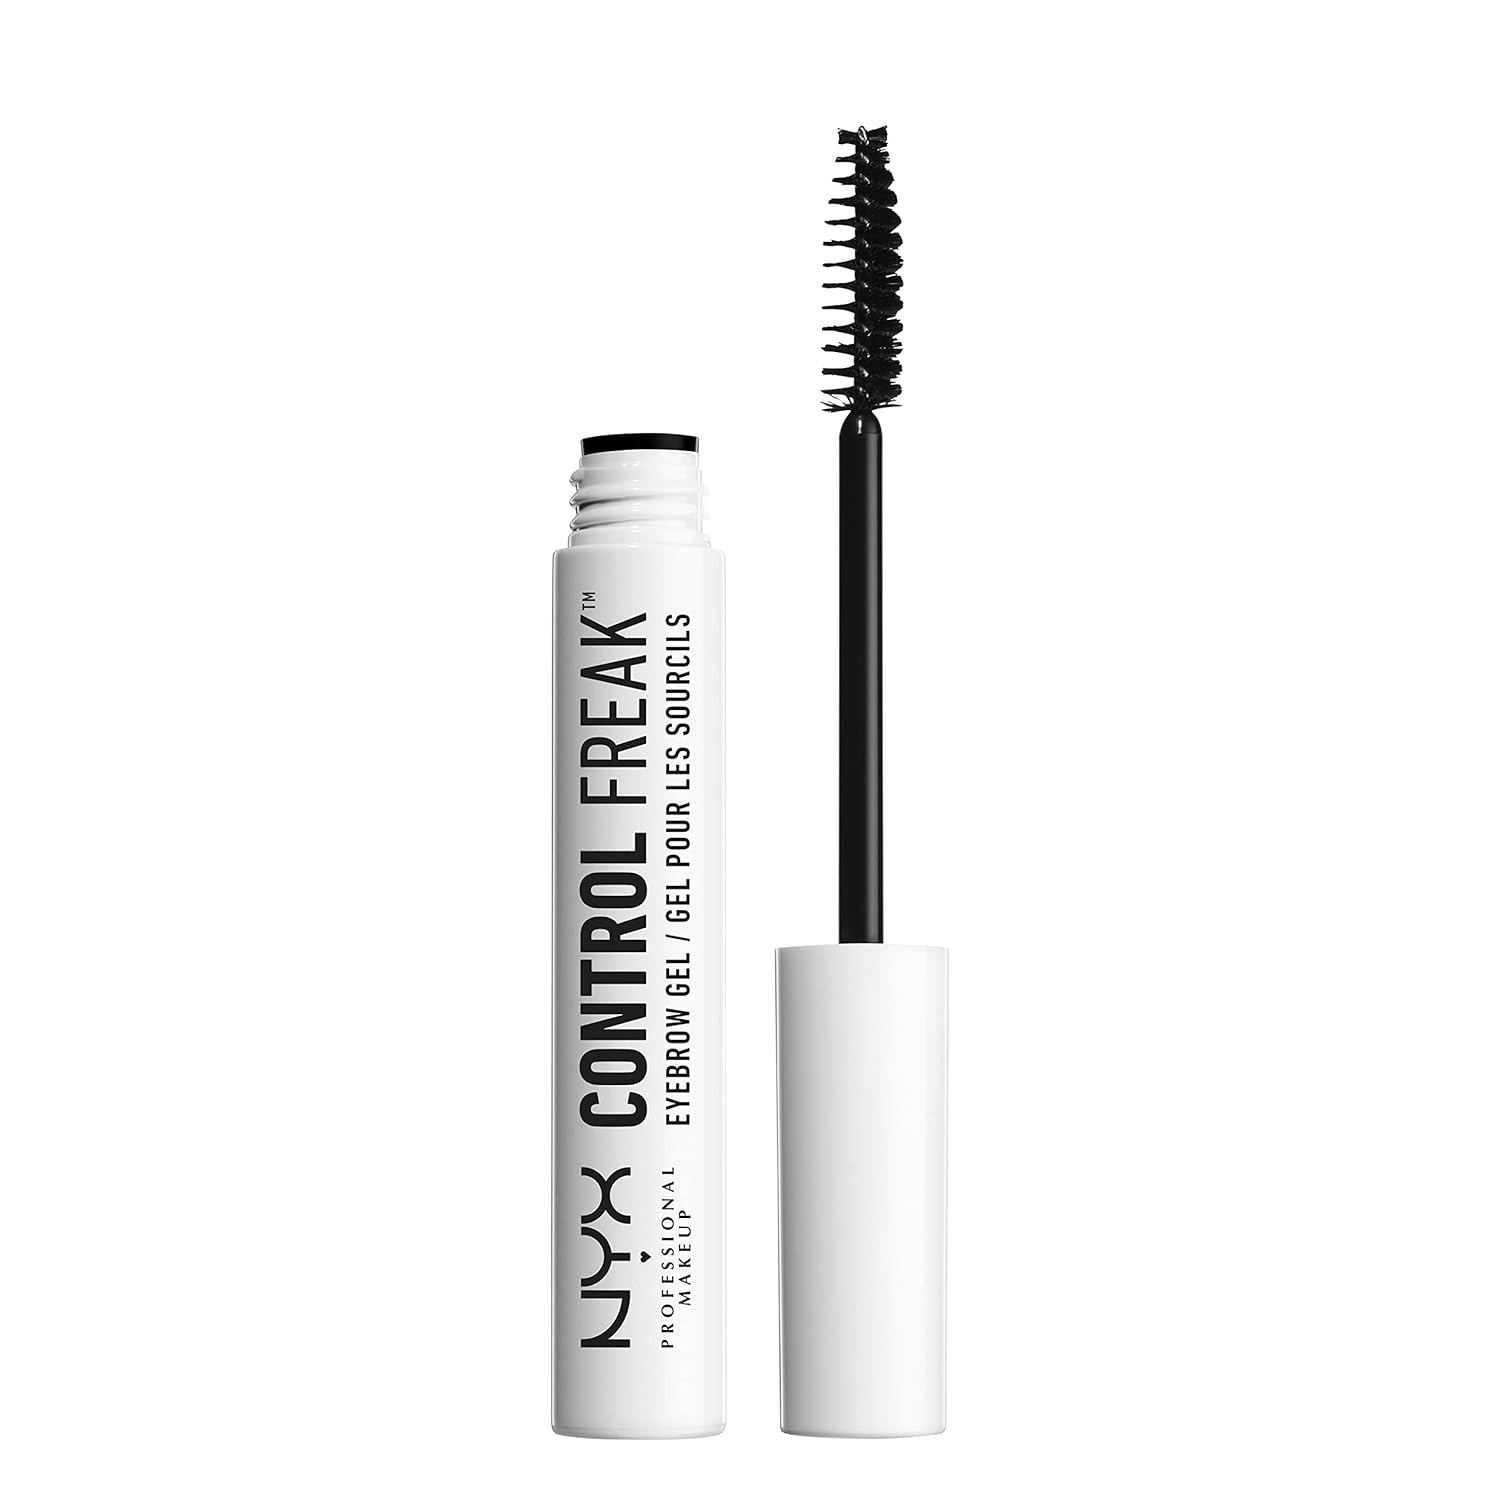 Best Fixing Gel for Eyebrows: Top 5 Picks for Perfectly Defined Brows